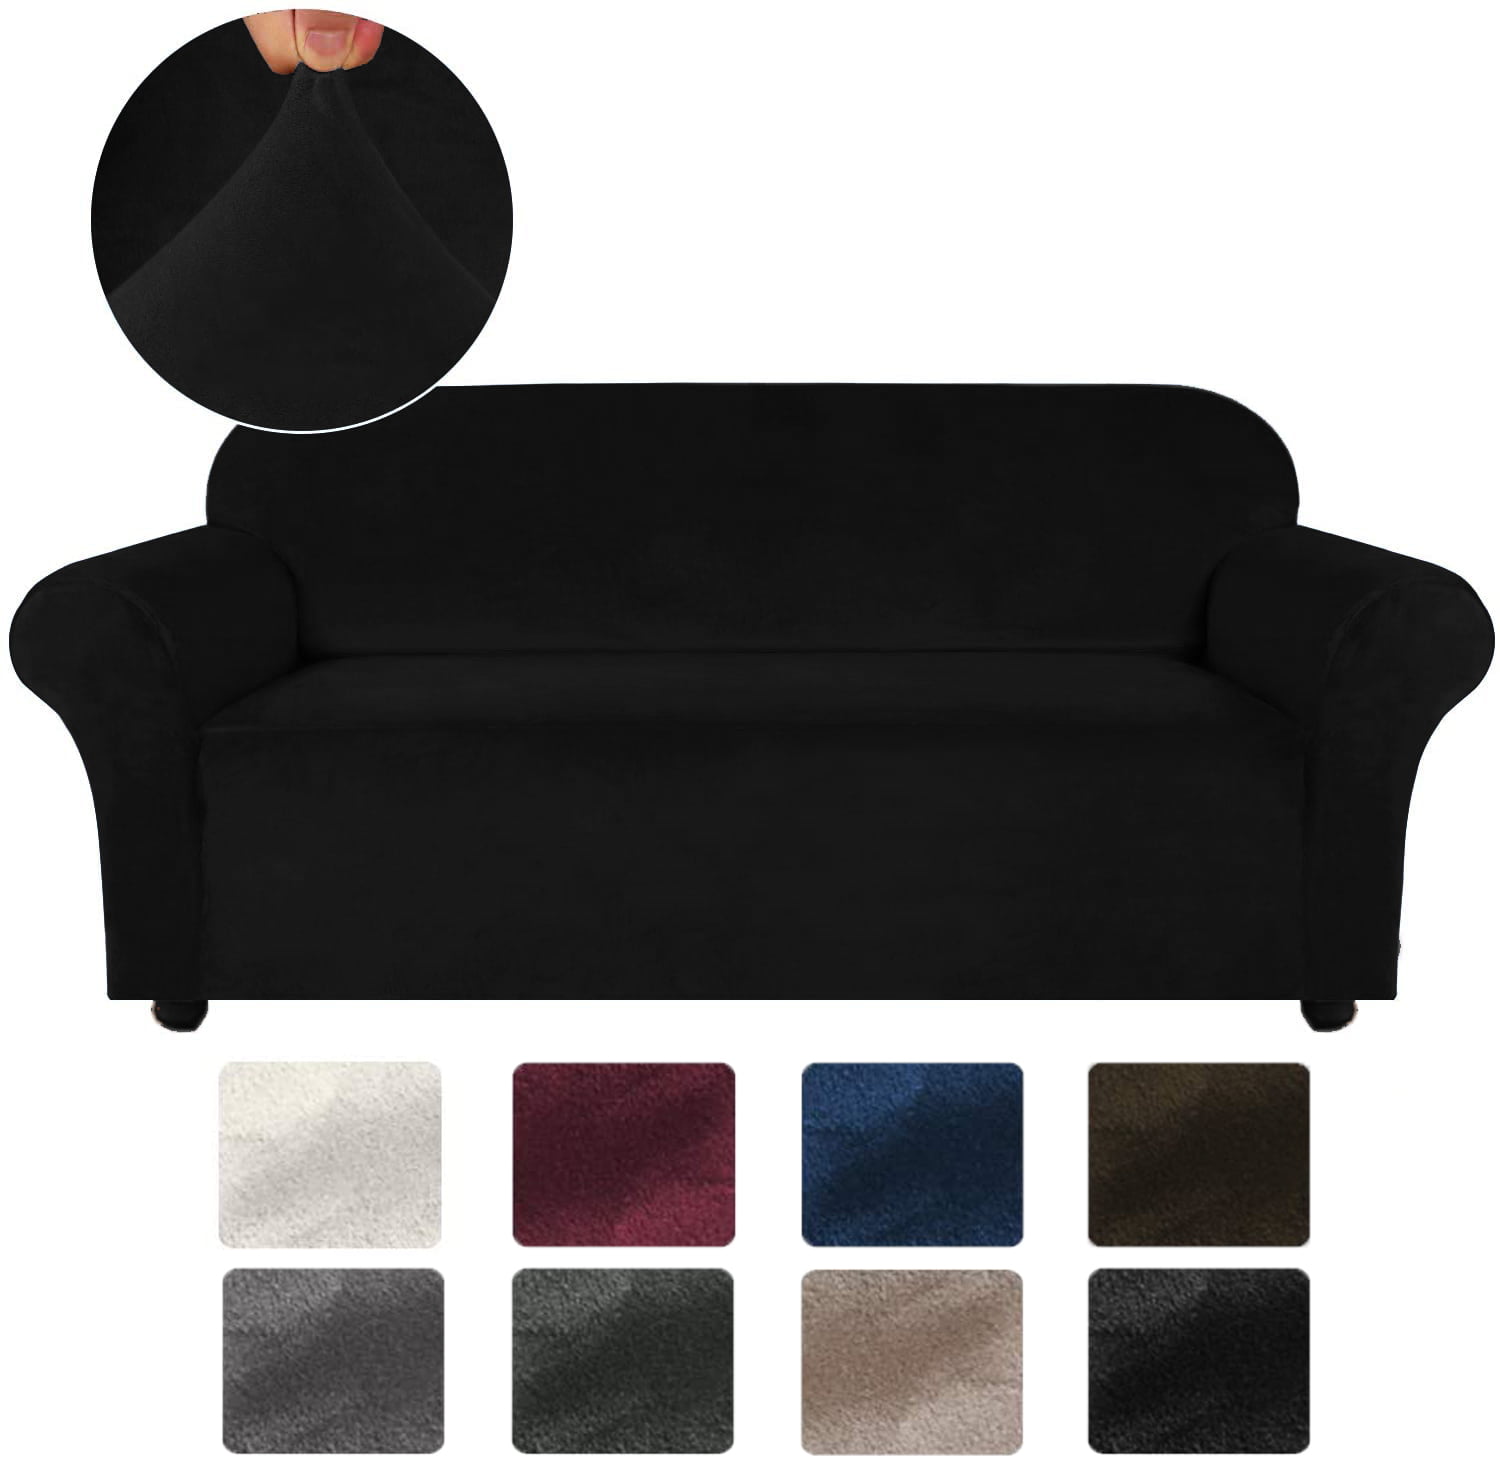 NAVY Sofa Couch Cover With Bow 1-2 SEATER SPECIAL 